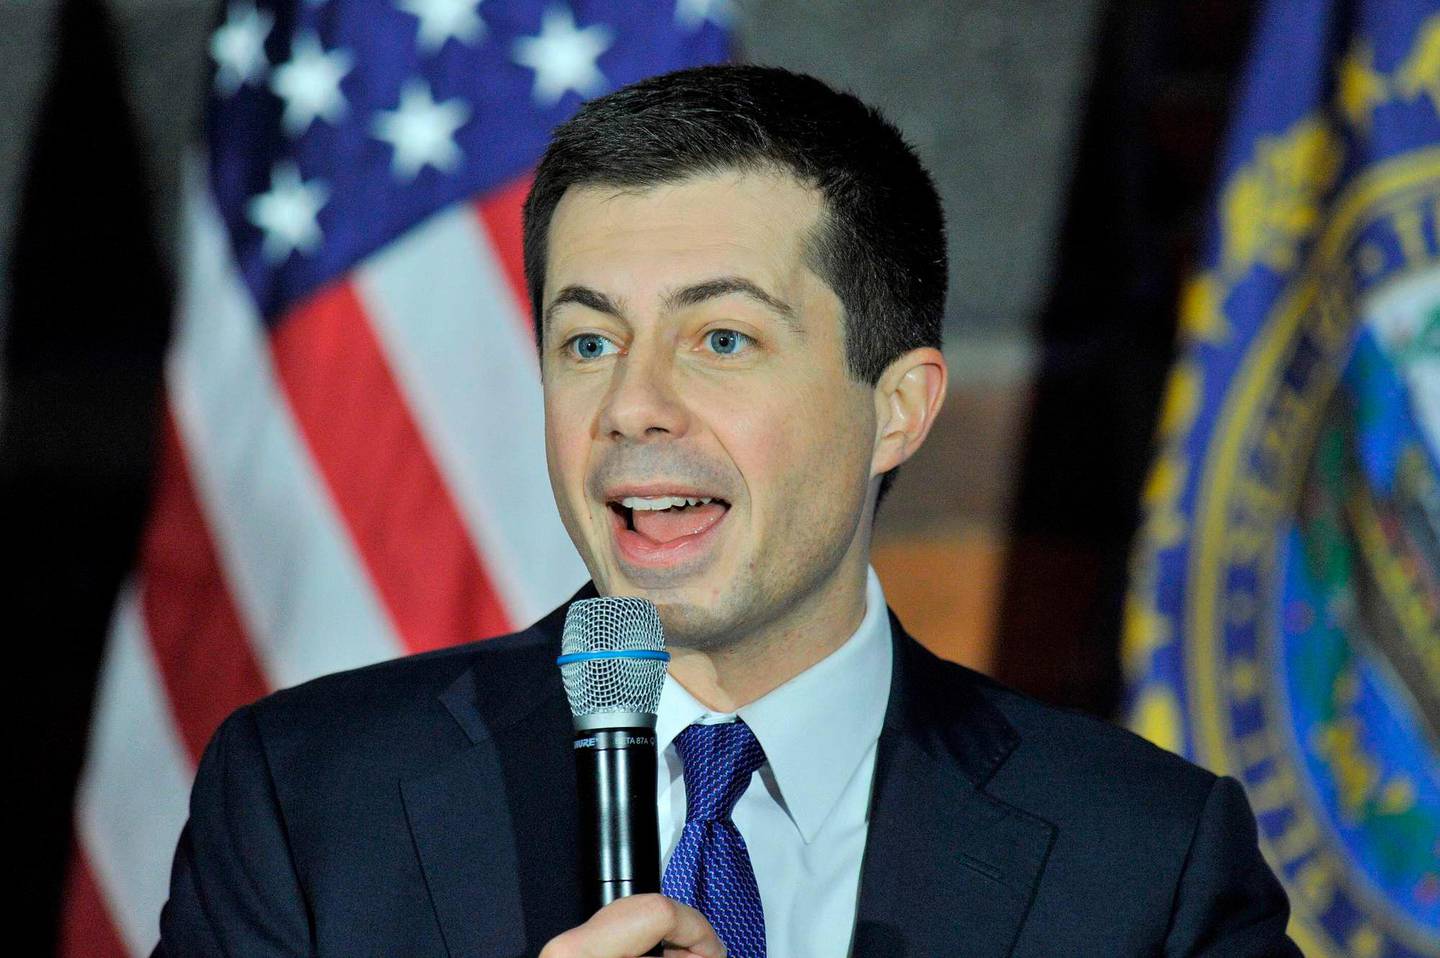 Democratic Presidential candidate Pete Buttigieg  speaks at the Rex Theater in his first public appearance since the Iowa Caucus the night before in Manchester, New Hampshire on February 4, 2020. - The US Democratic Party was unable to provide results from the Iowa state caucuses Tuesday despite spending millions of dollars, owing to what it called a technical glitch and President Donald Trump called incompetence.New Hampshire votes second, on February 11,2020 and tradition dictates that the top performers in Iowa board jets and race to The Granite State to capitalize on the momentum. (Photo by Joseph PREZIOSO / AFP)